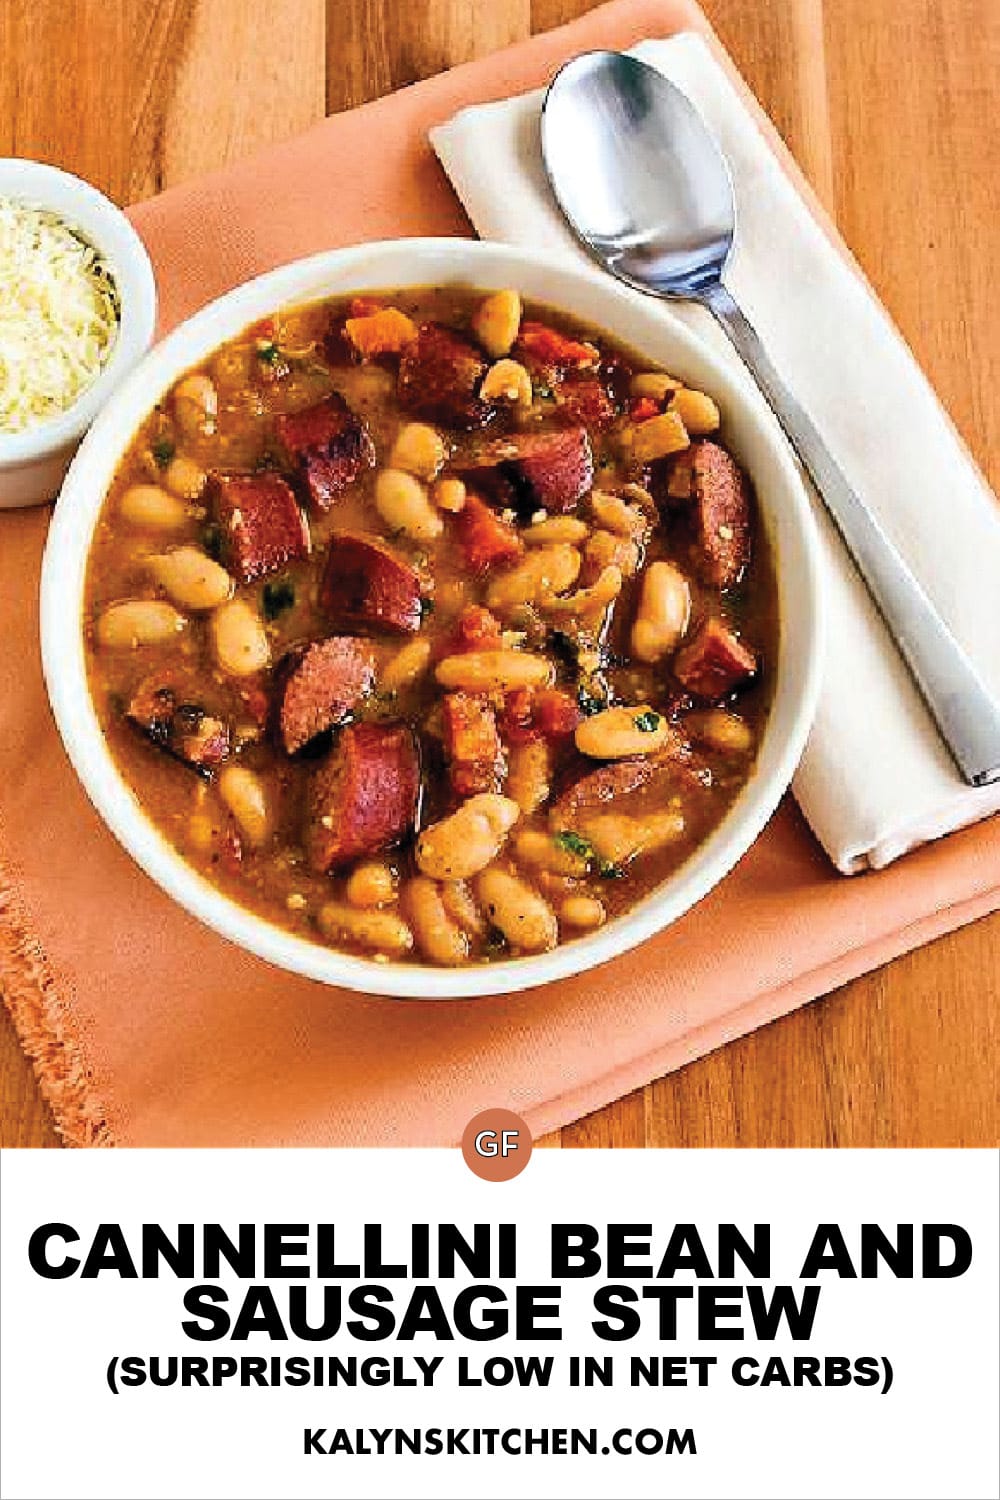 Pinterest image of Cannellini Bean and Sausage Stew